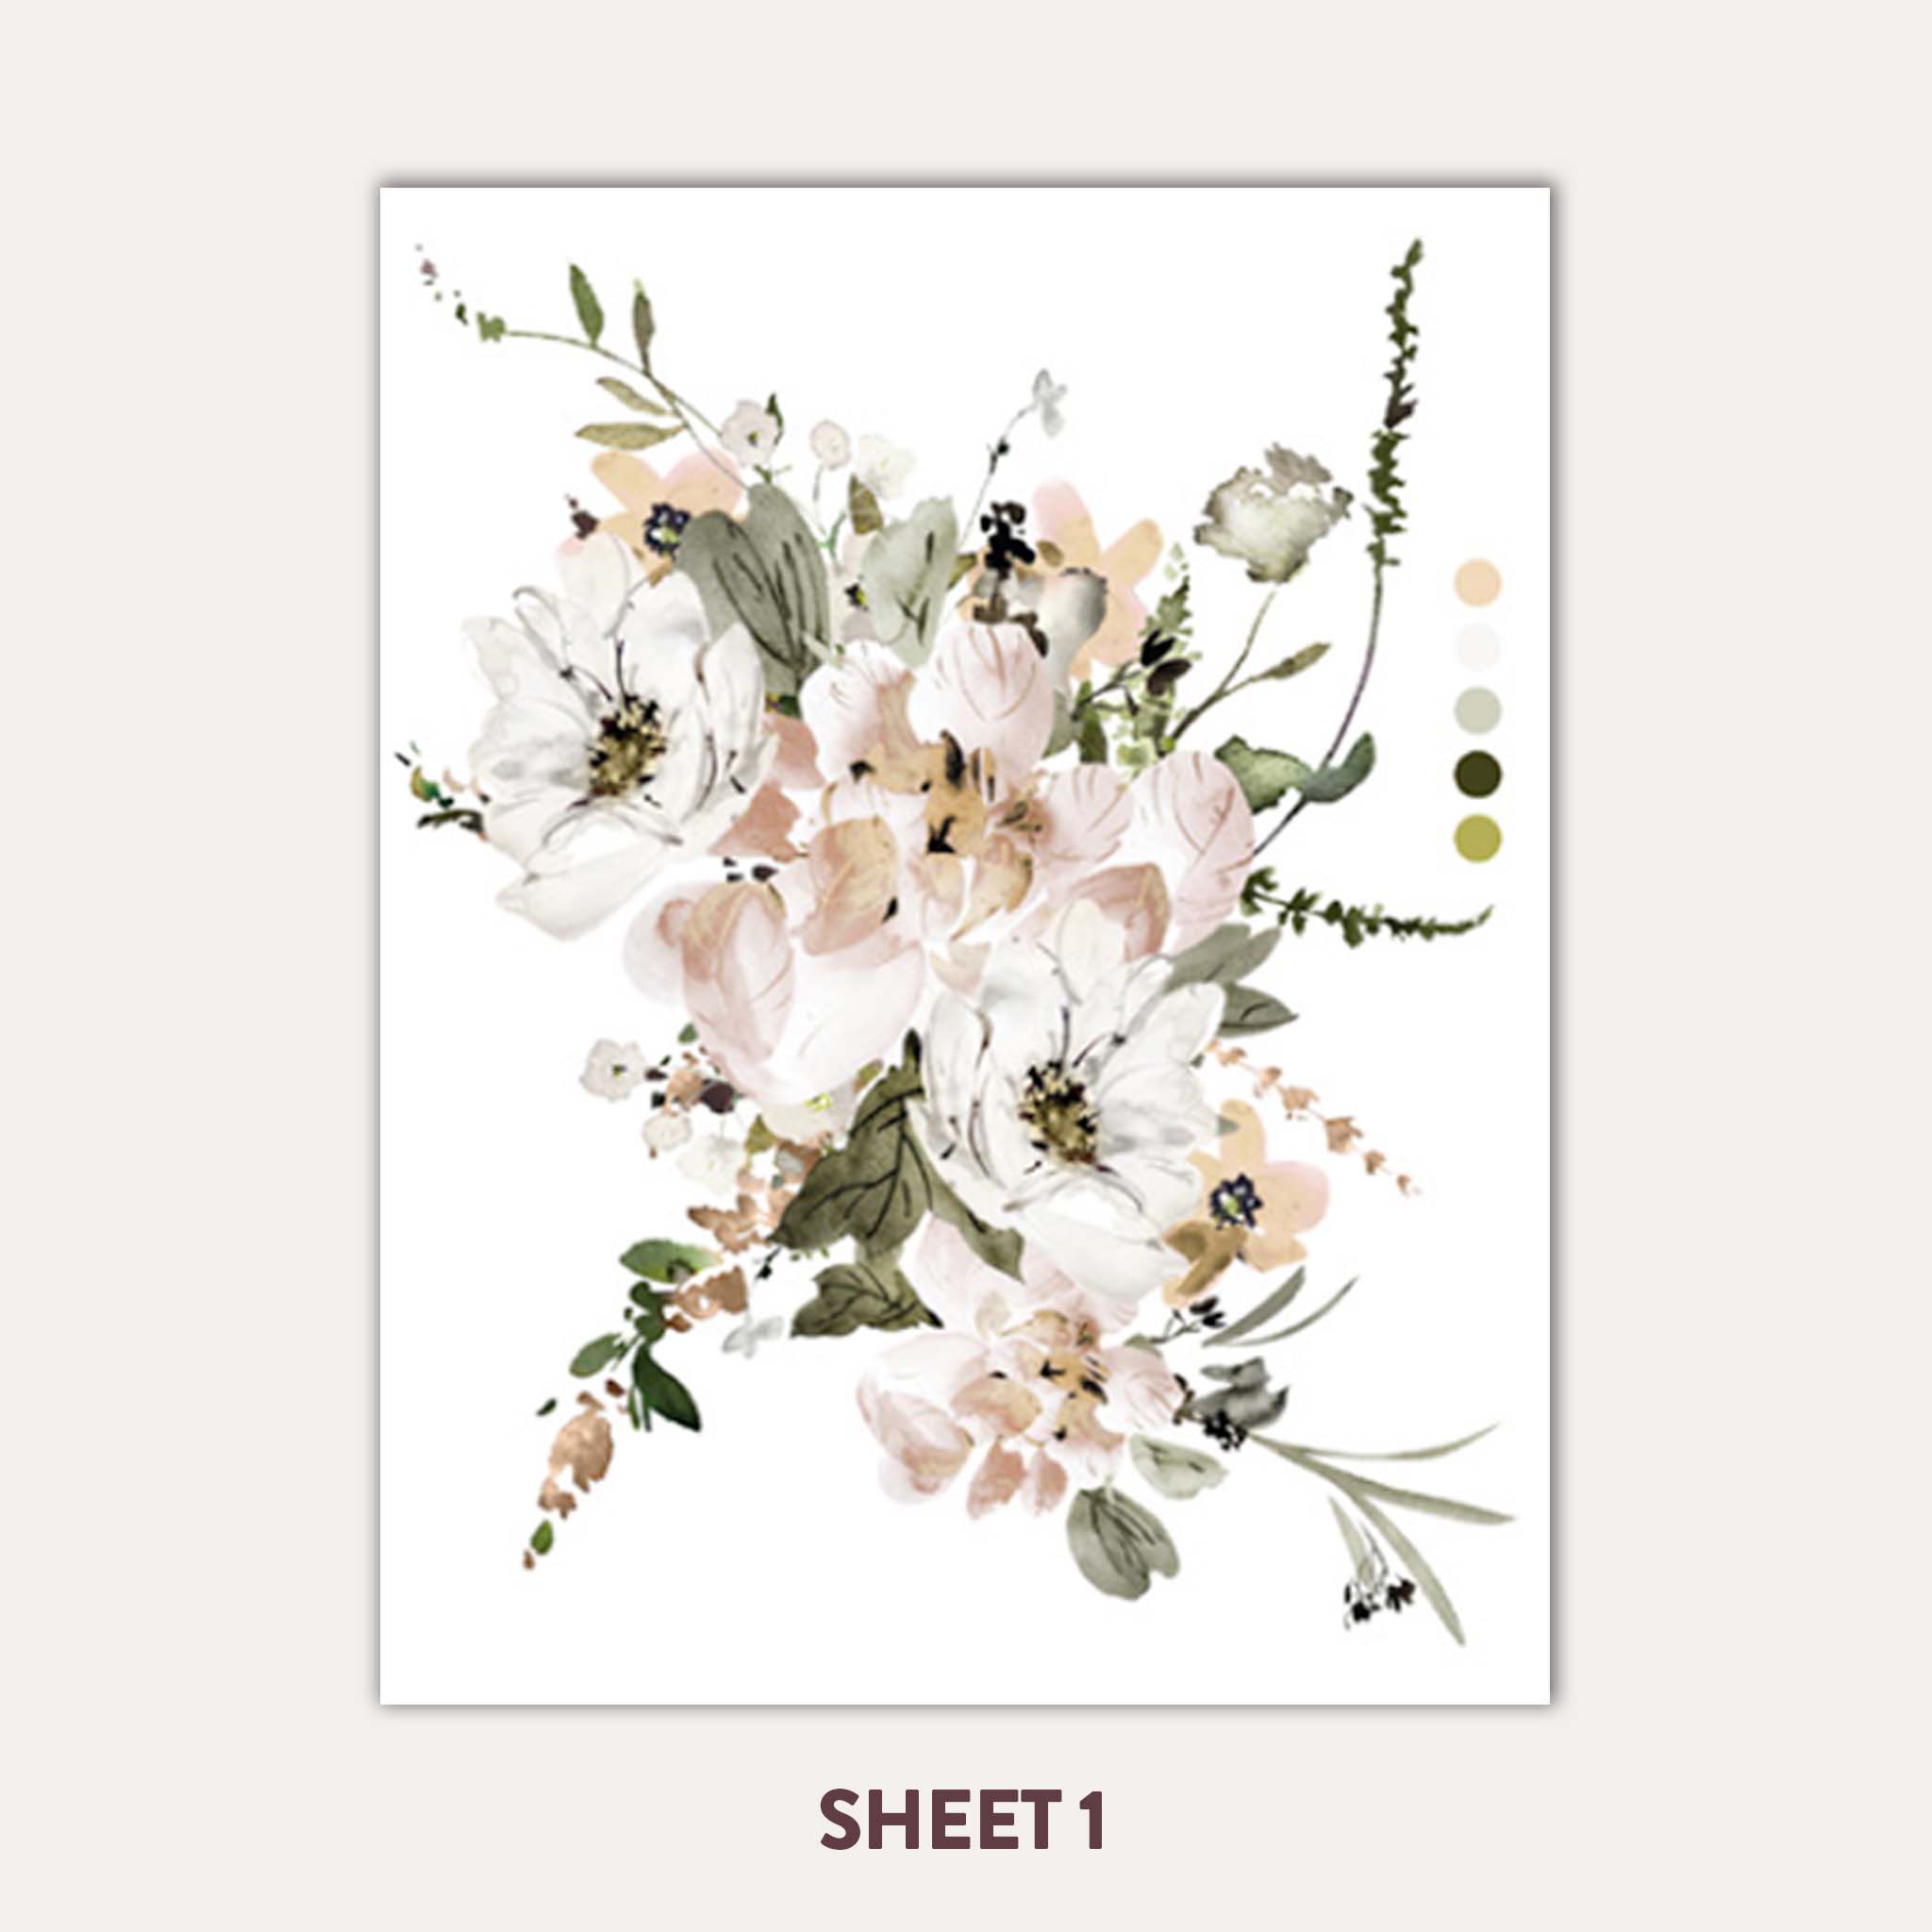 Sheet 1 of ReDesign with Prima's Pastels Artistry small transfer features a large bouquet of cream and blush florals.